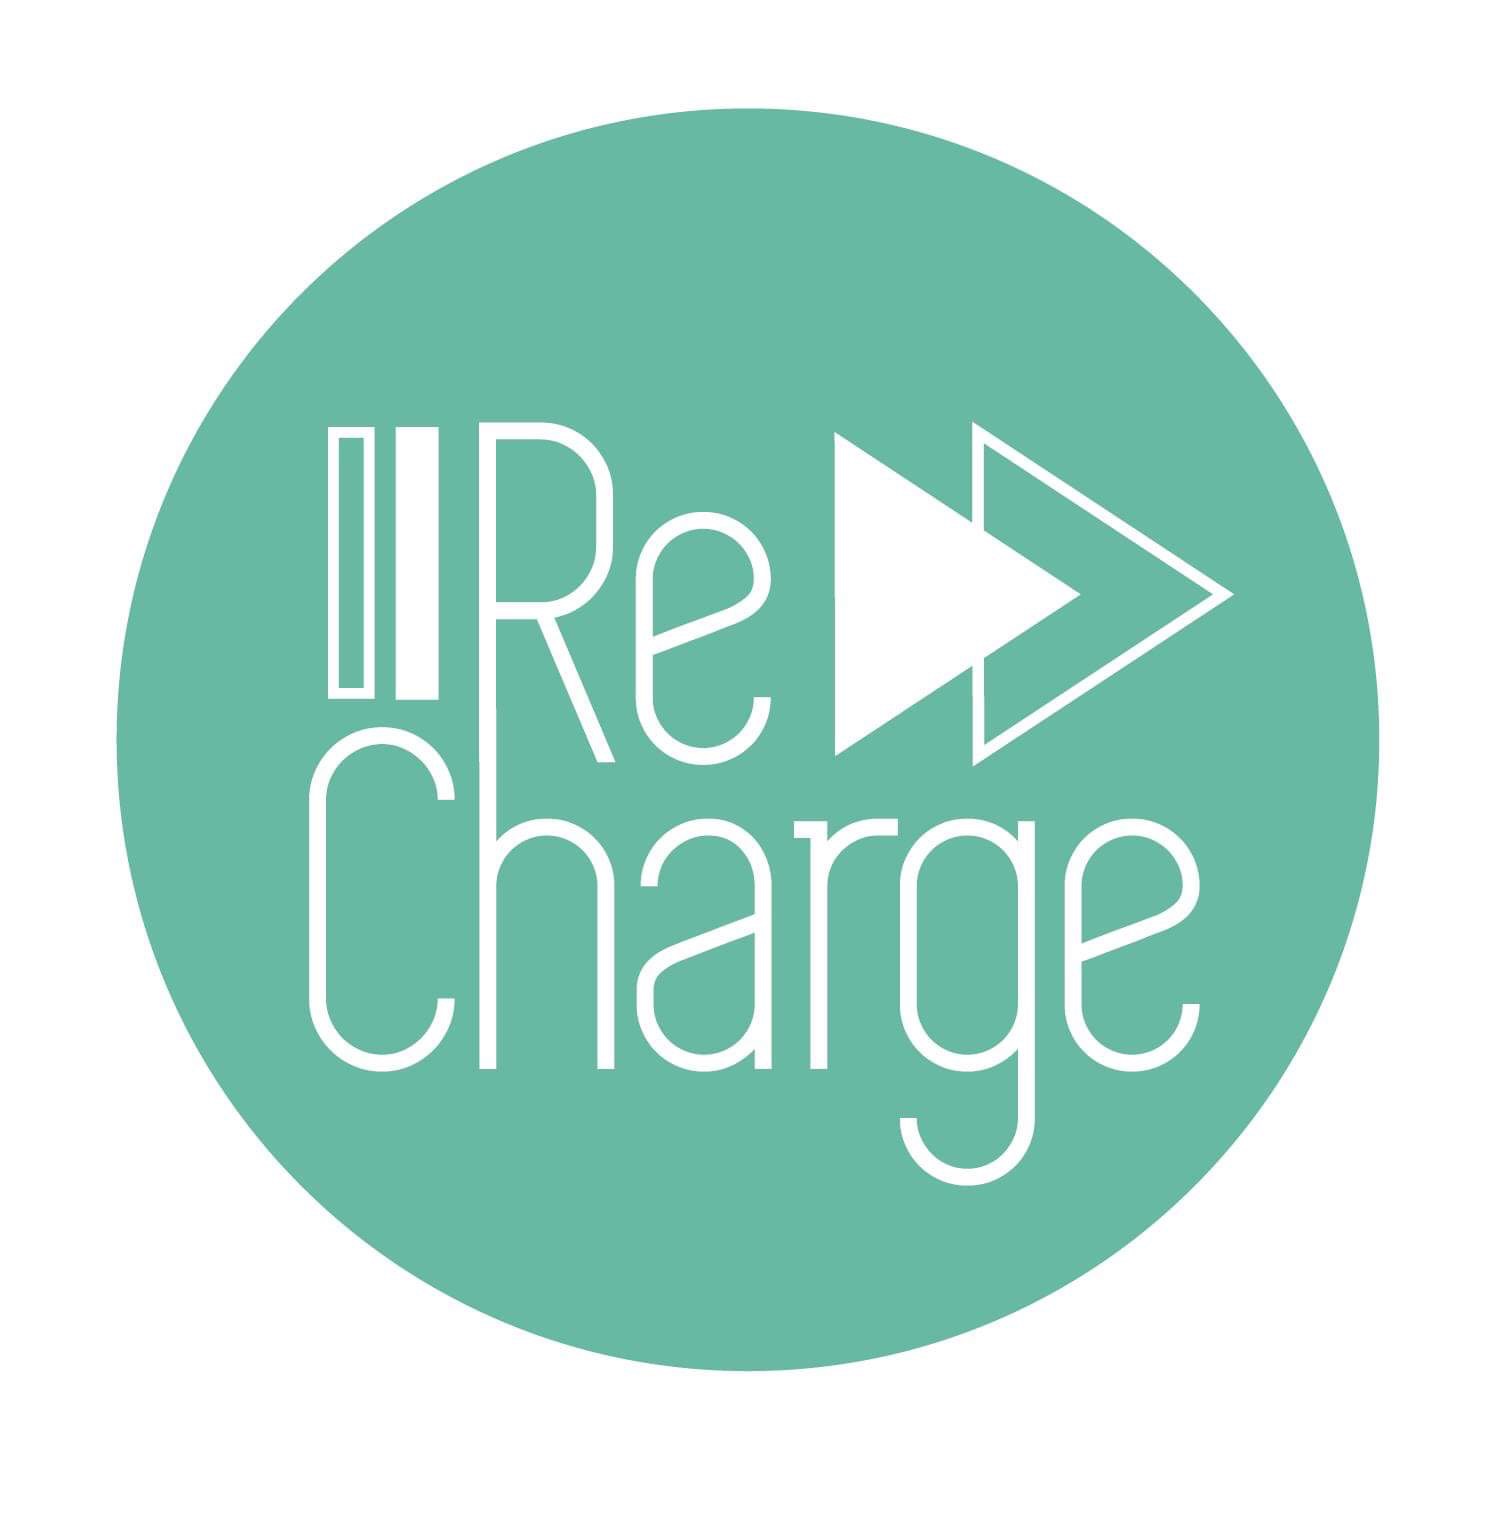 Re-charge